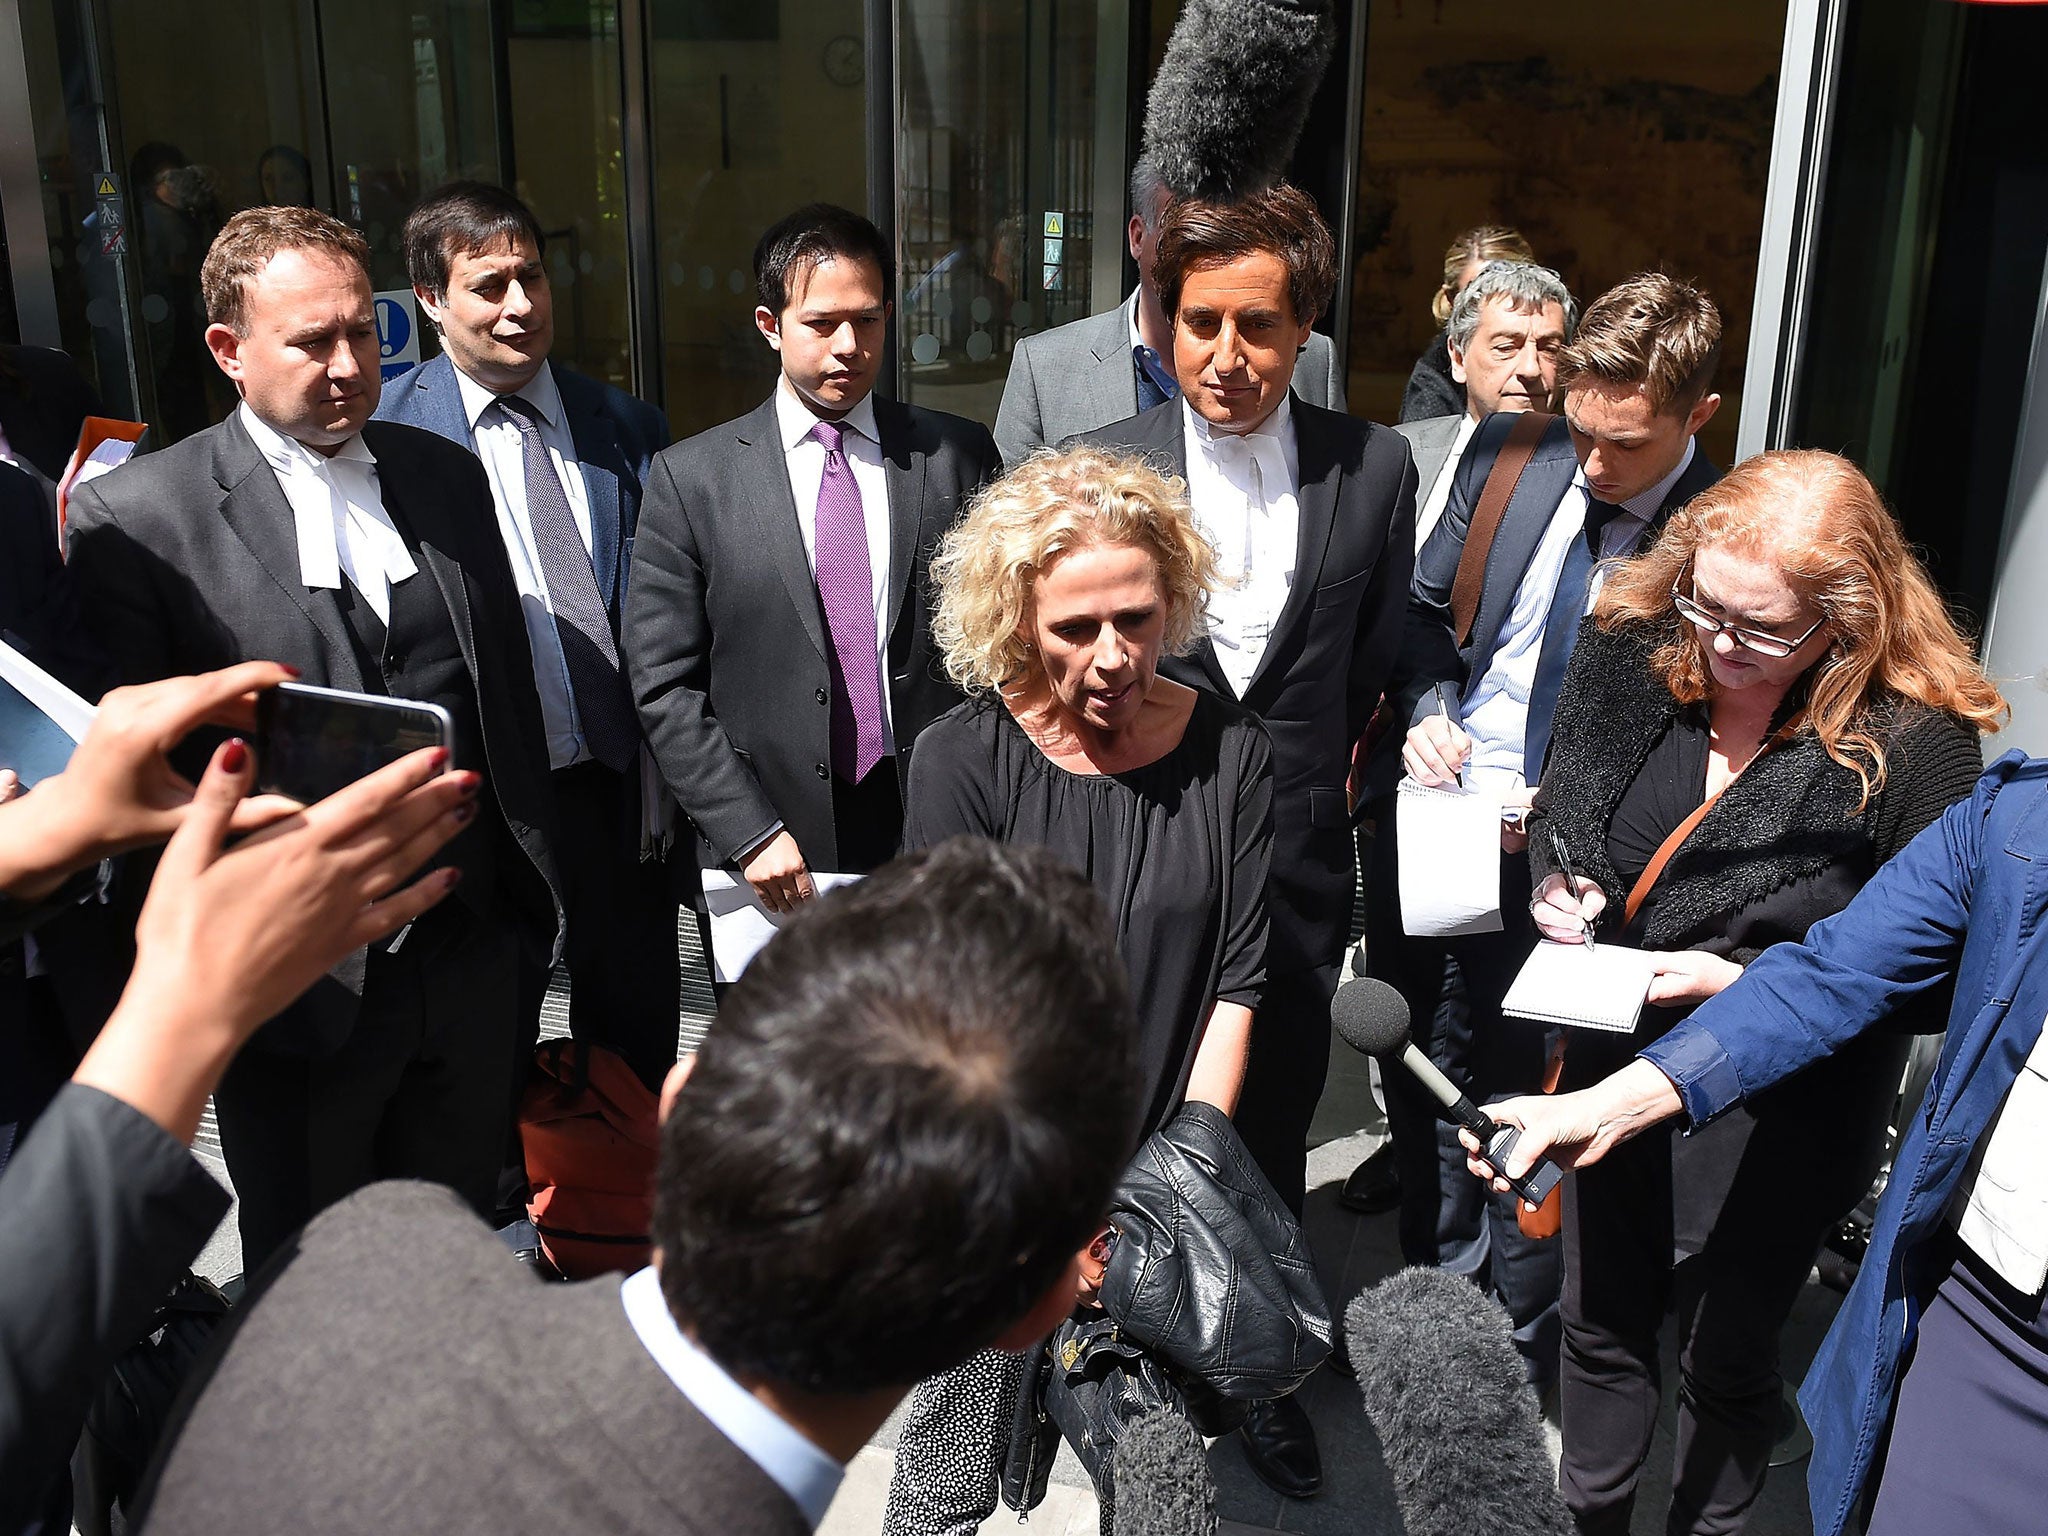 Actress Lucy Taggart, centre, speaks to the media outside the Rolls Building